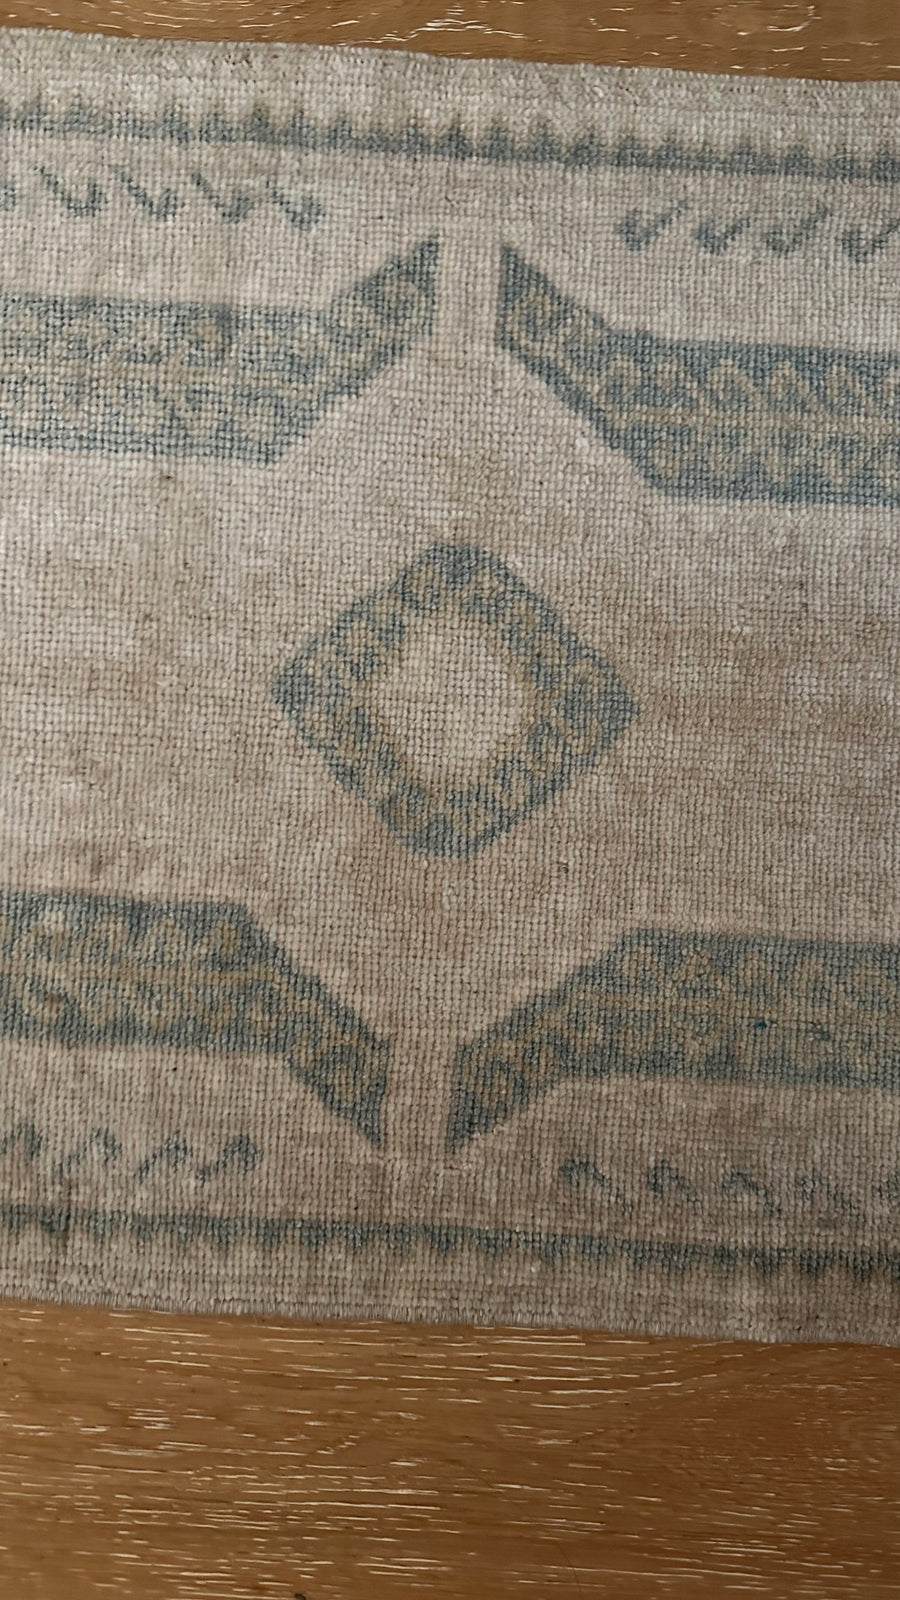 1’9 x 3’4 Antique Turkish Rug Muted Sea Foam, Beige and Camel